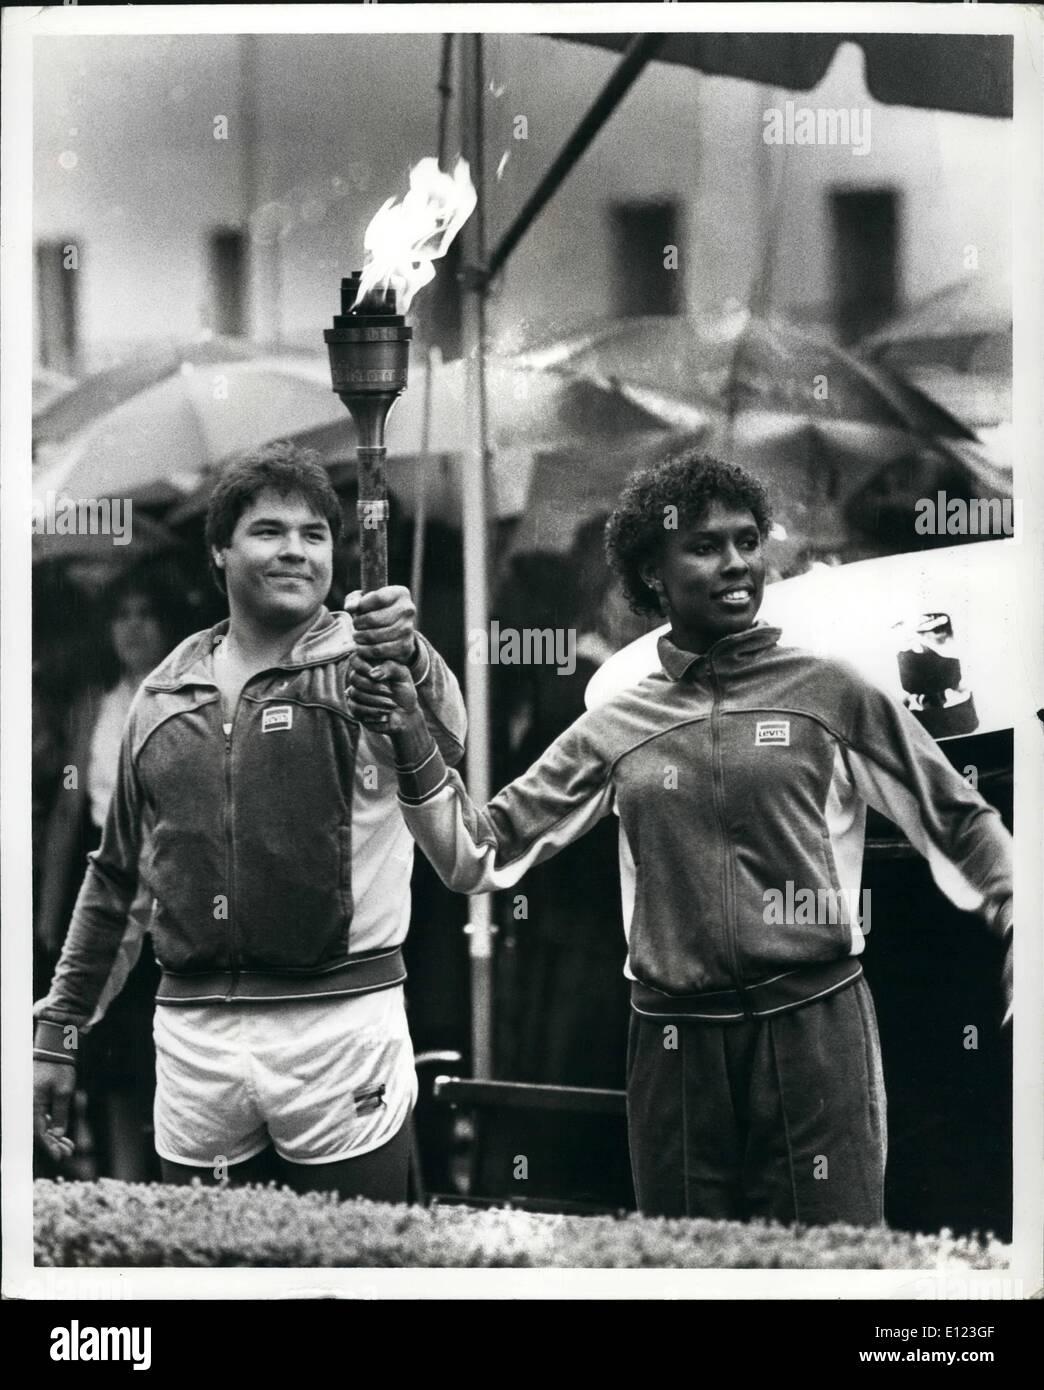 May 05, 1984 - United Nations New York The meandering 82 day journey of the 1984 Olympic Torch Relay began in New York City in front of the United Nations building. On the same day that the Soviet Union announced that they would not send their athletes to the games in Los Angeles. Gina Hemphill and Bill Thorpe Jr., grandchildren of Olympic greats Jesse Ownes and Jim Thorpe, lit the torch and ran the first kilometer. O.P.S. Bill Thorpe Jr. on the left and Gina Hemphill on the right hold the torch aloft in the rain after the lighting ceremony. Stock Photo